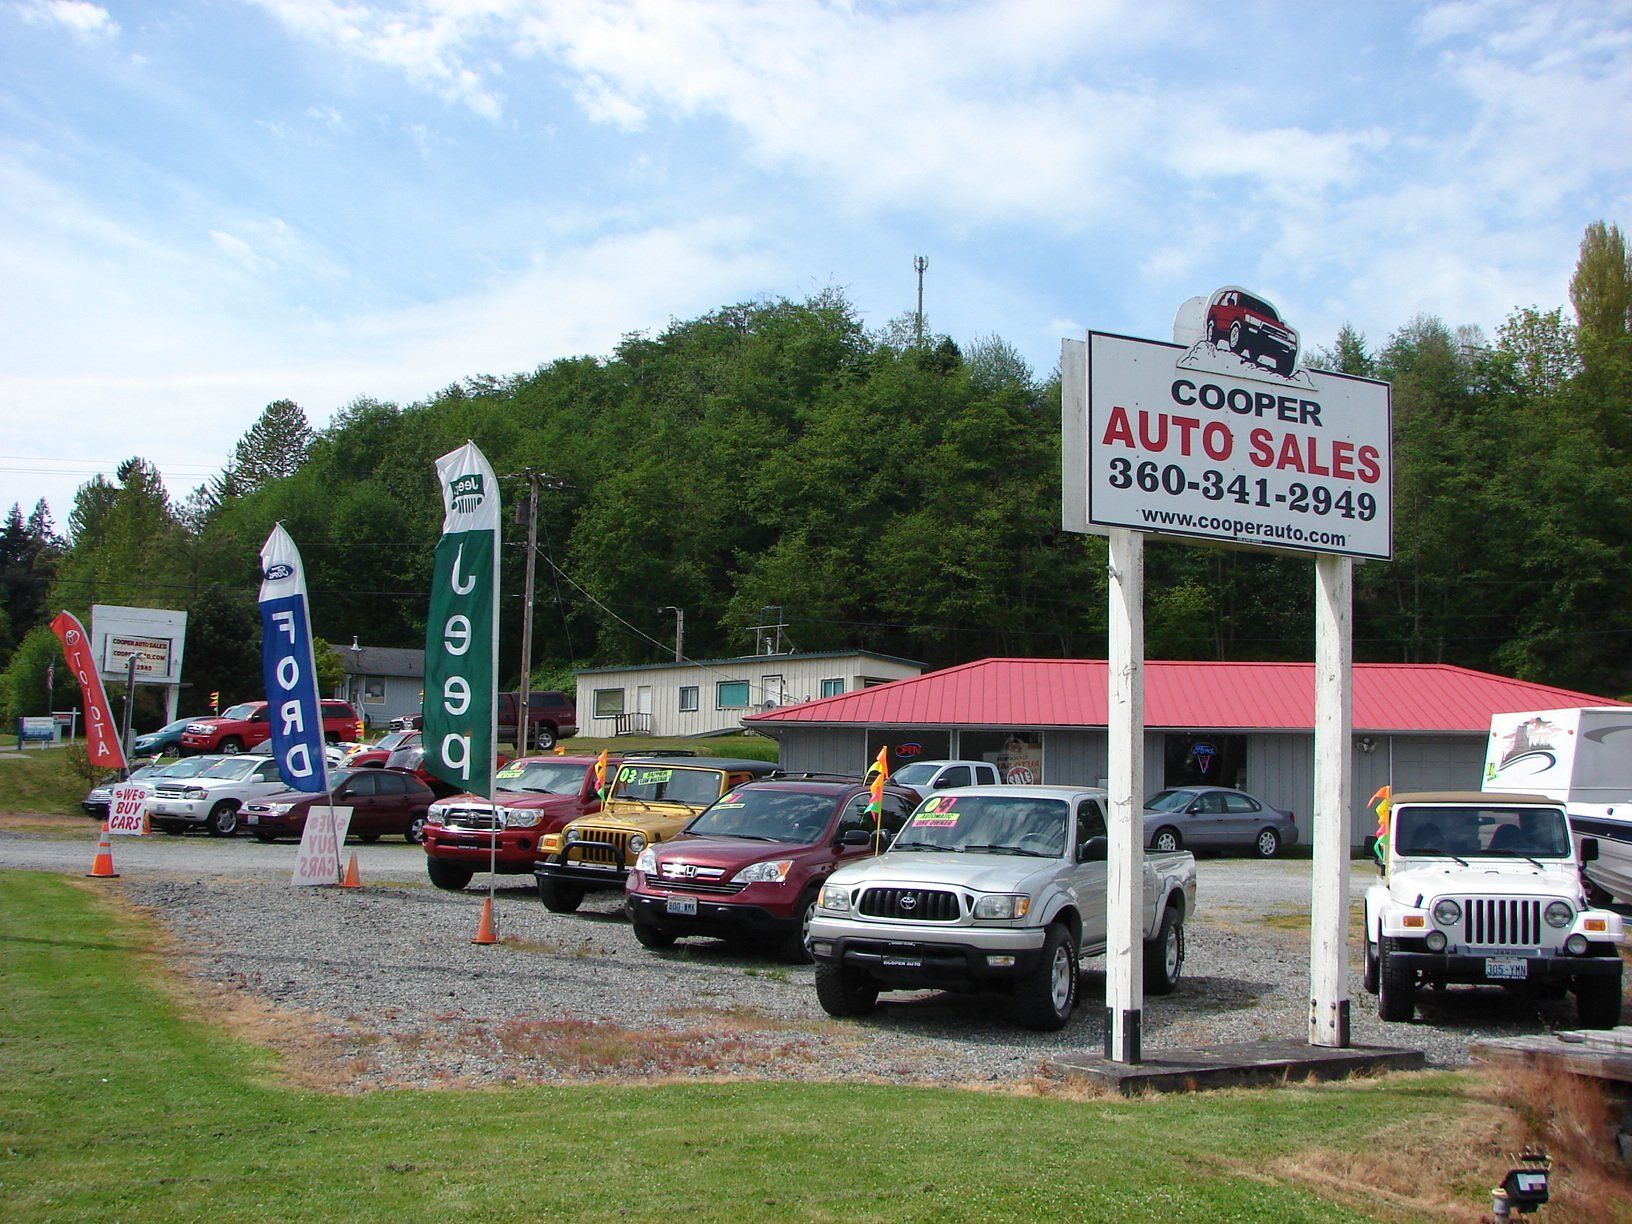 Cooper Auto Sales - We Sell, Rent, Buy, and Consign Cars, Trucks, SUVs, and RVs on Whidbey Island Washington.